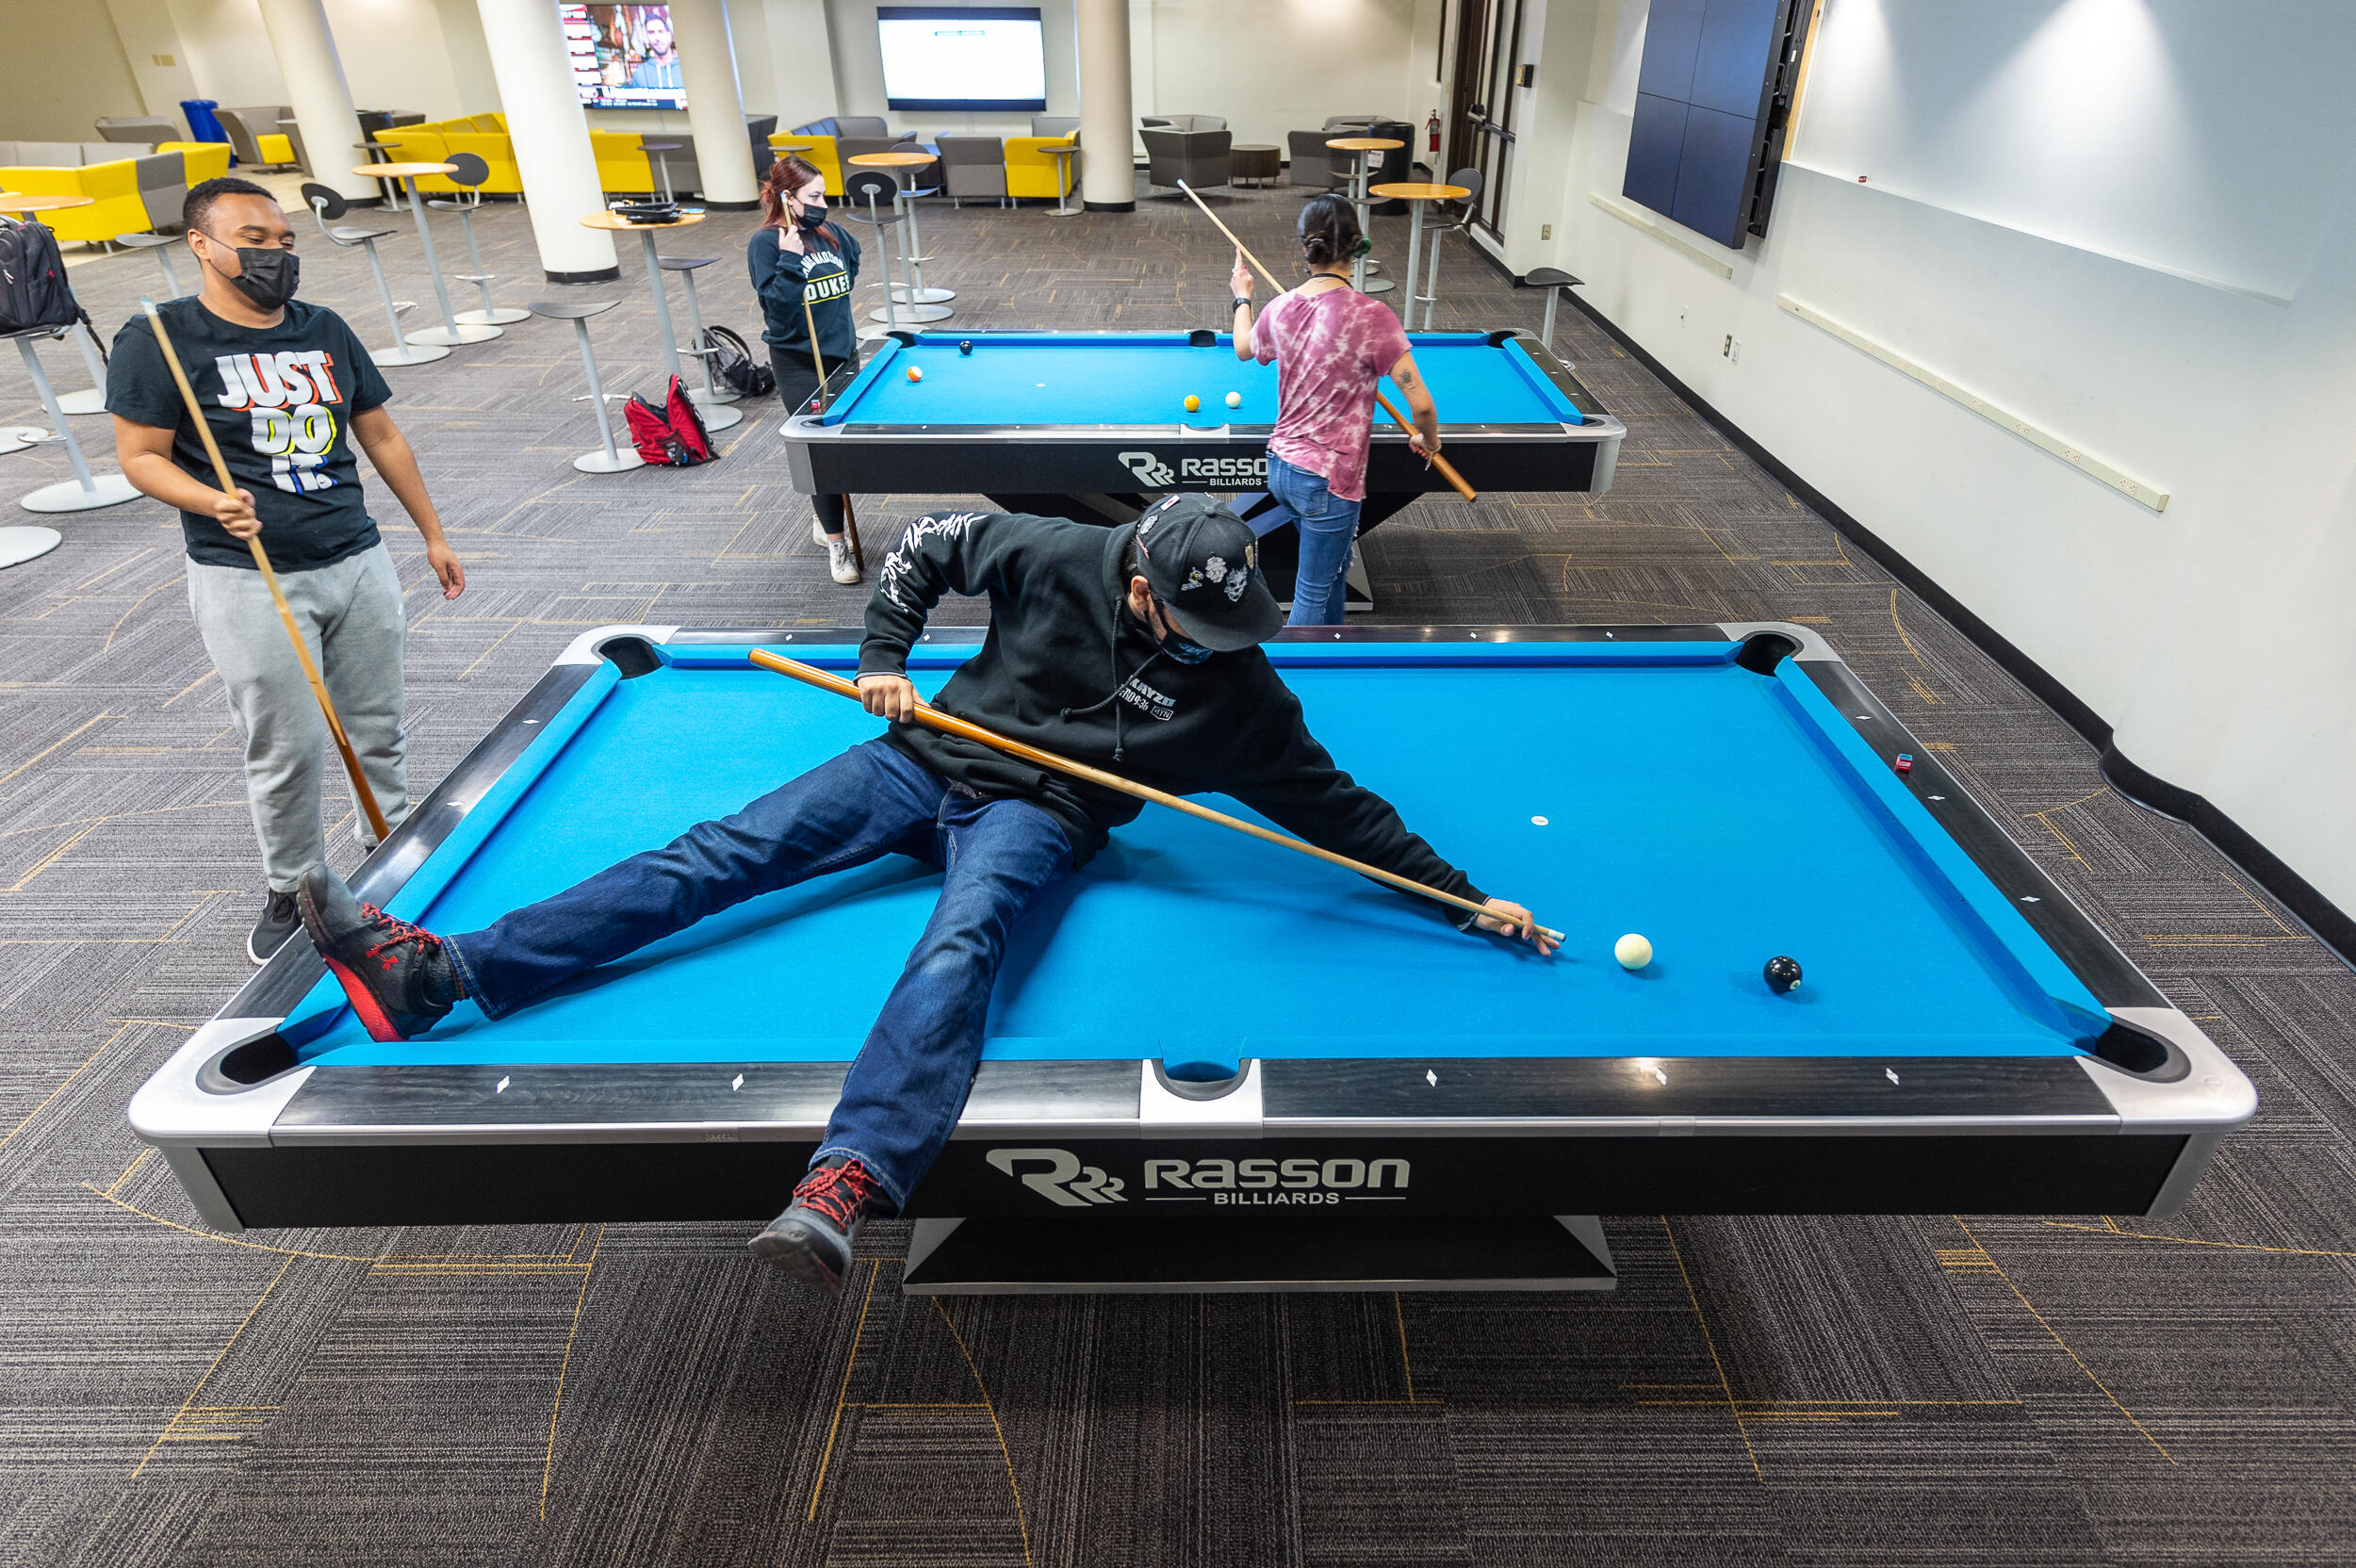 A student sits on a bright blue pool table in a large indoor space with other pool tables where several students wait to play pool.